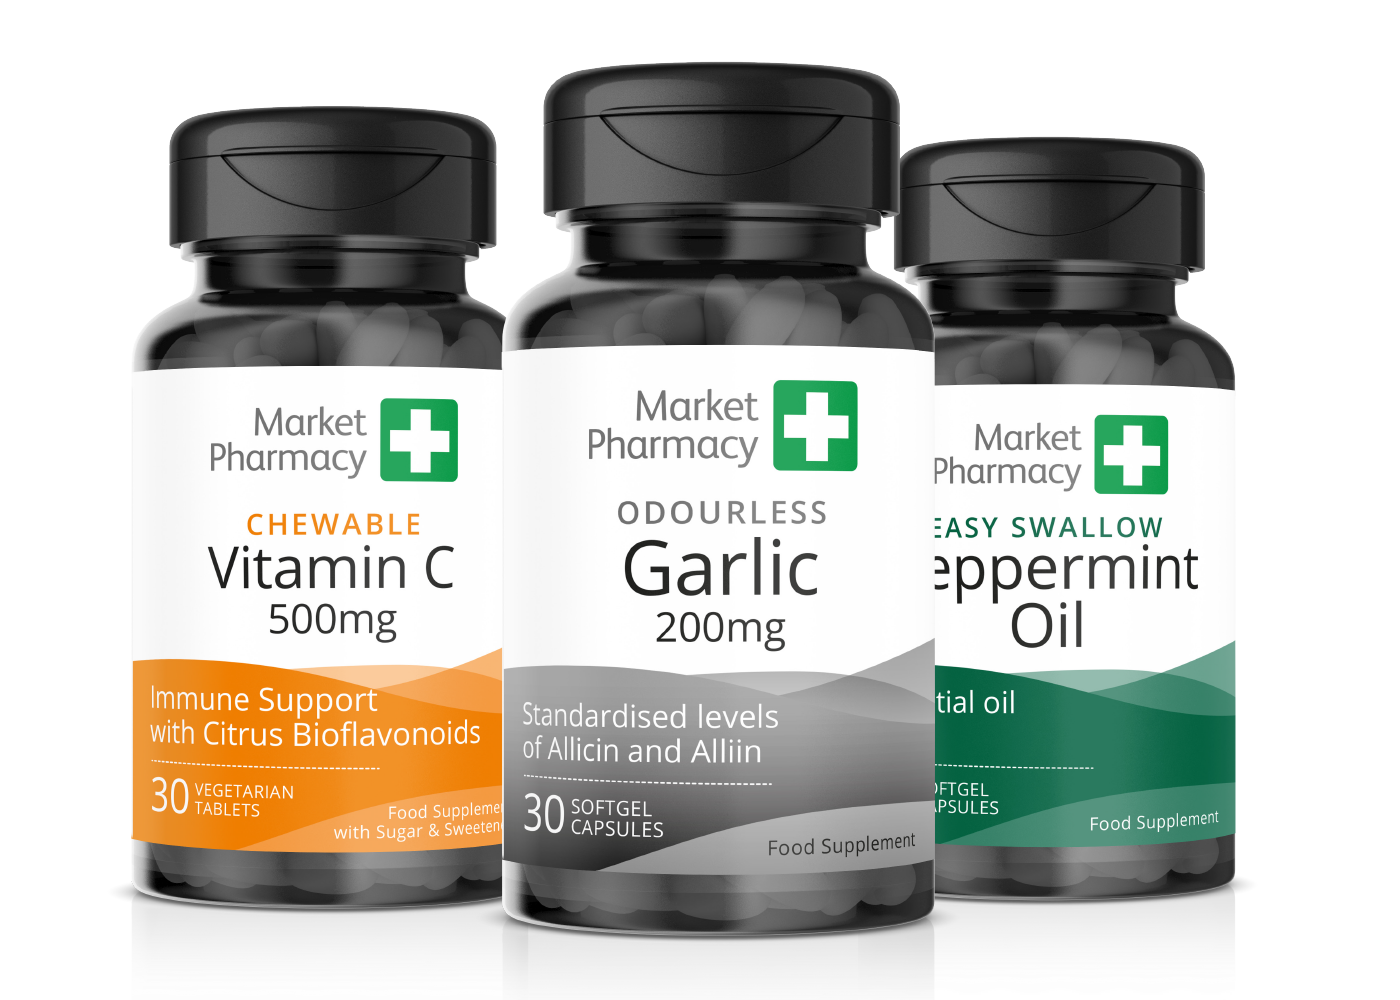 Extensive range of high quality supplements